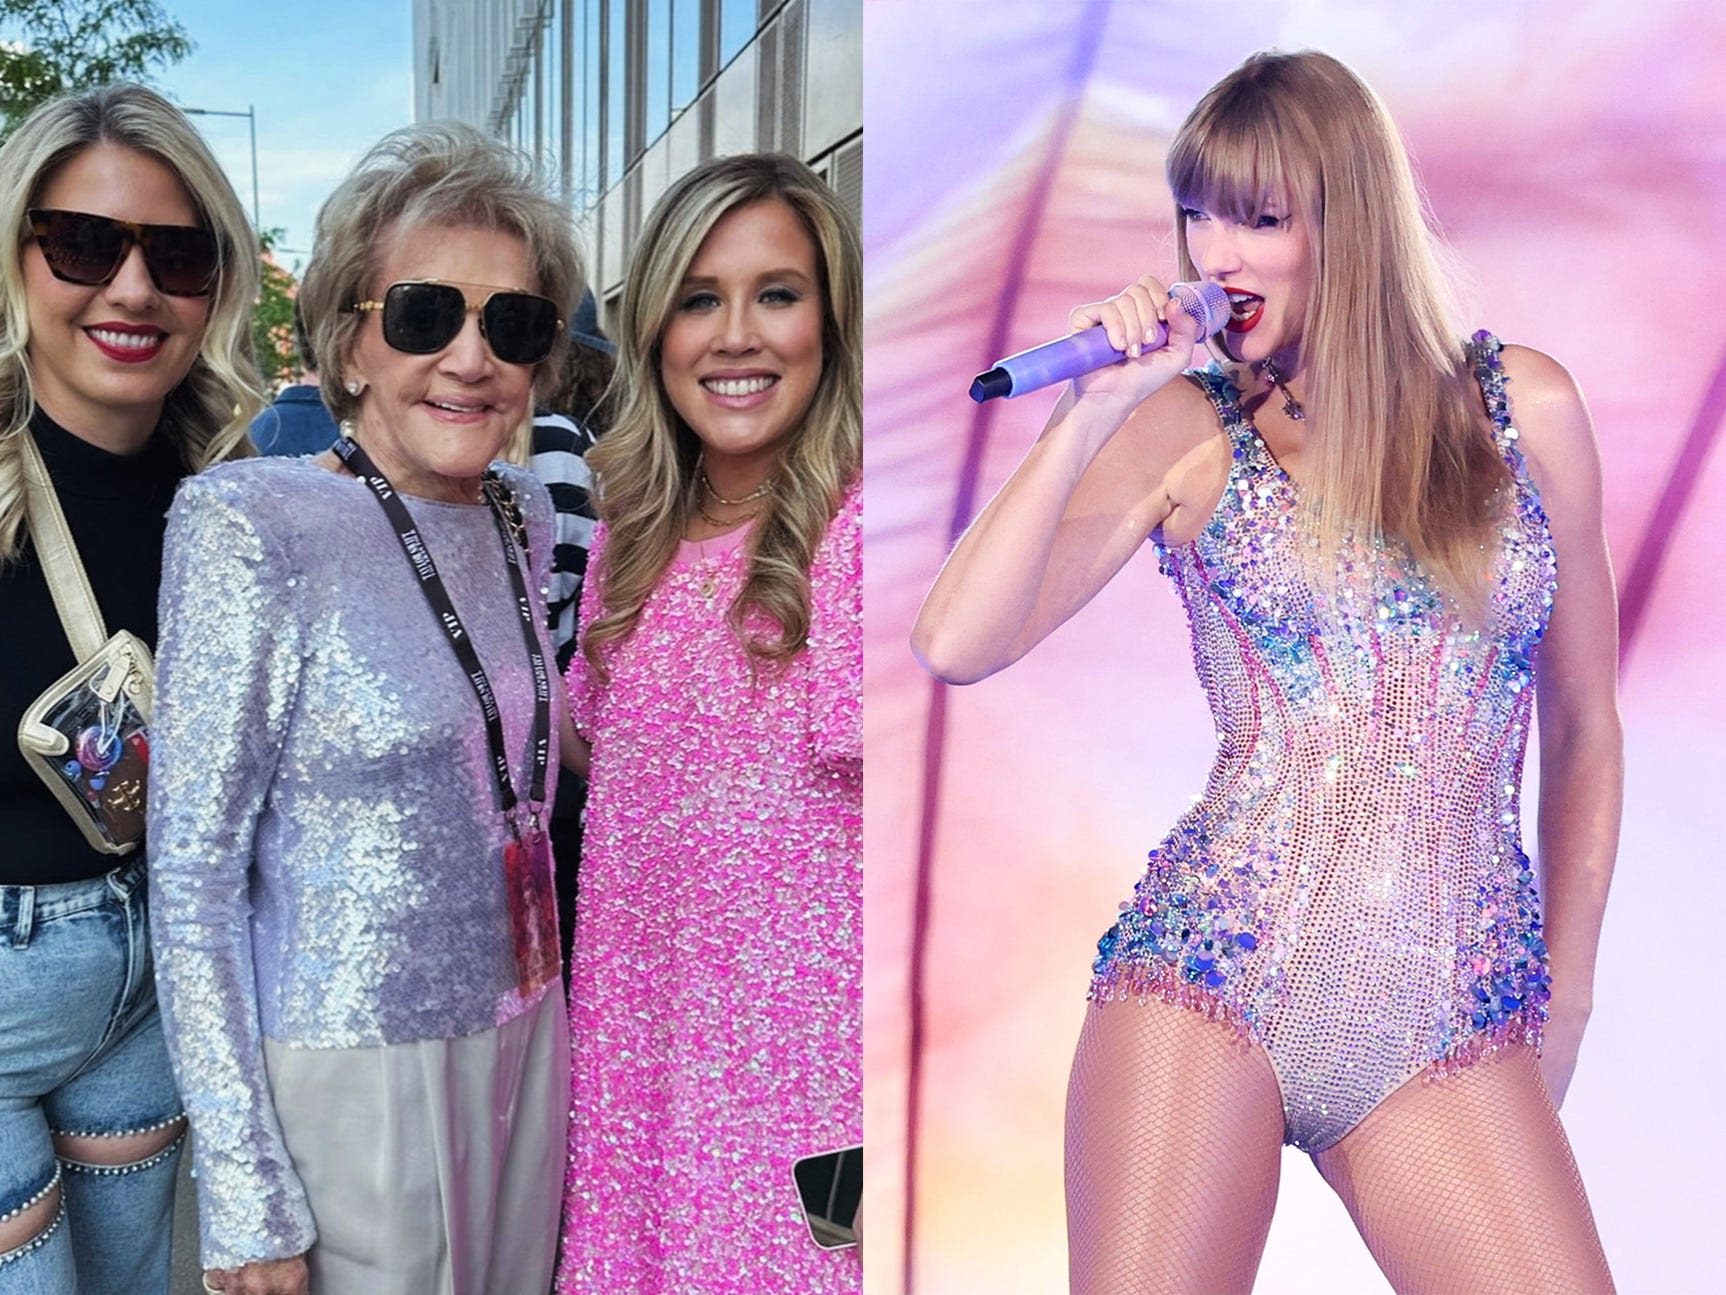 I'm 89 and flew 5,000 miles to see Taylor Swift in Paris. I treated myself to a $2K per night hotel and it was worth every penny.